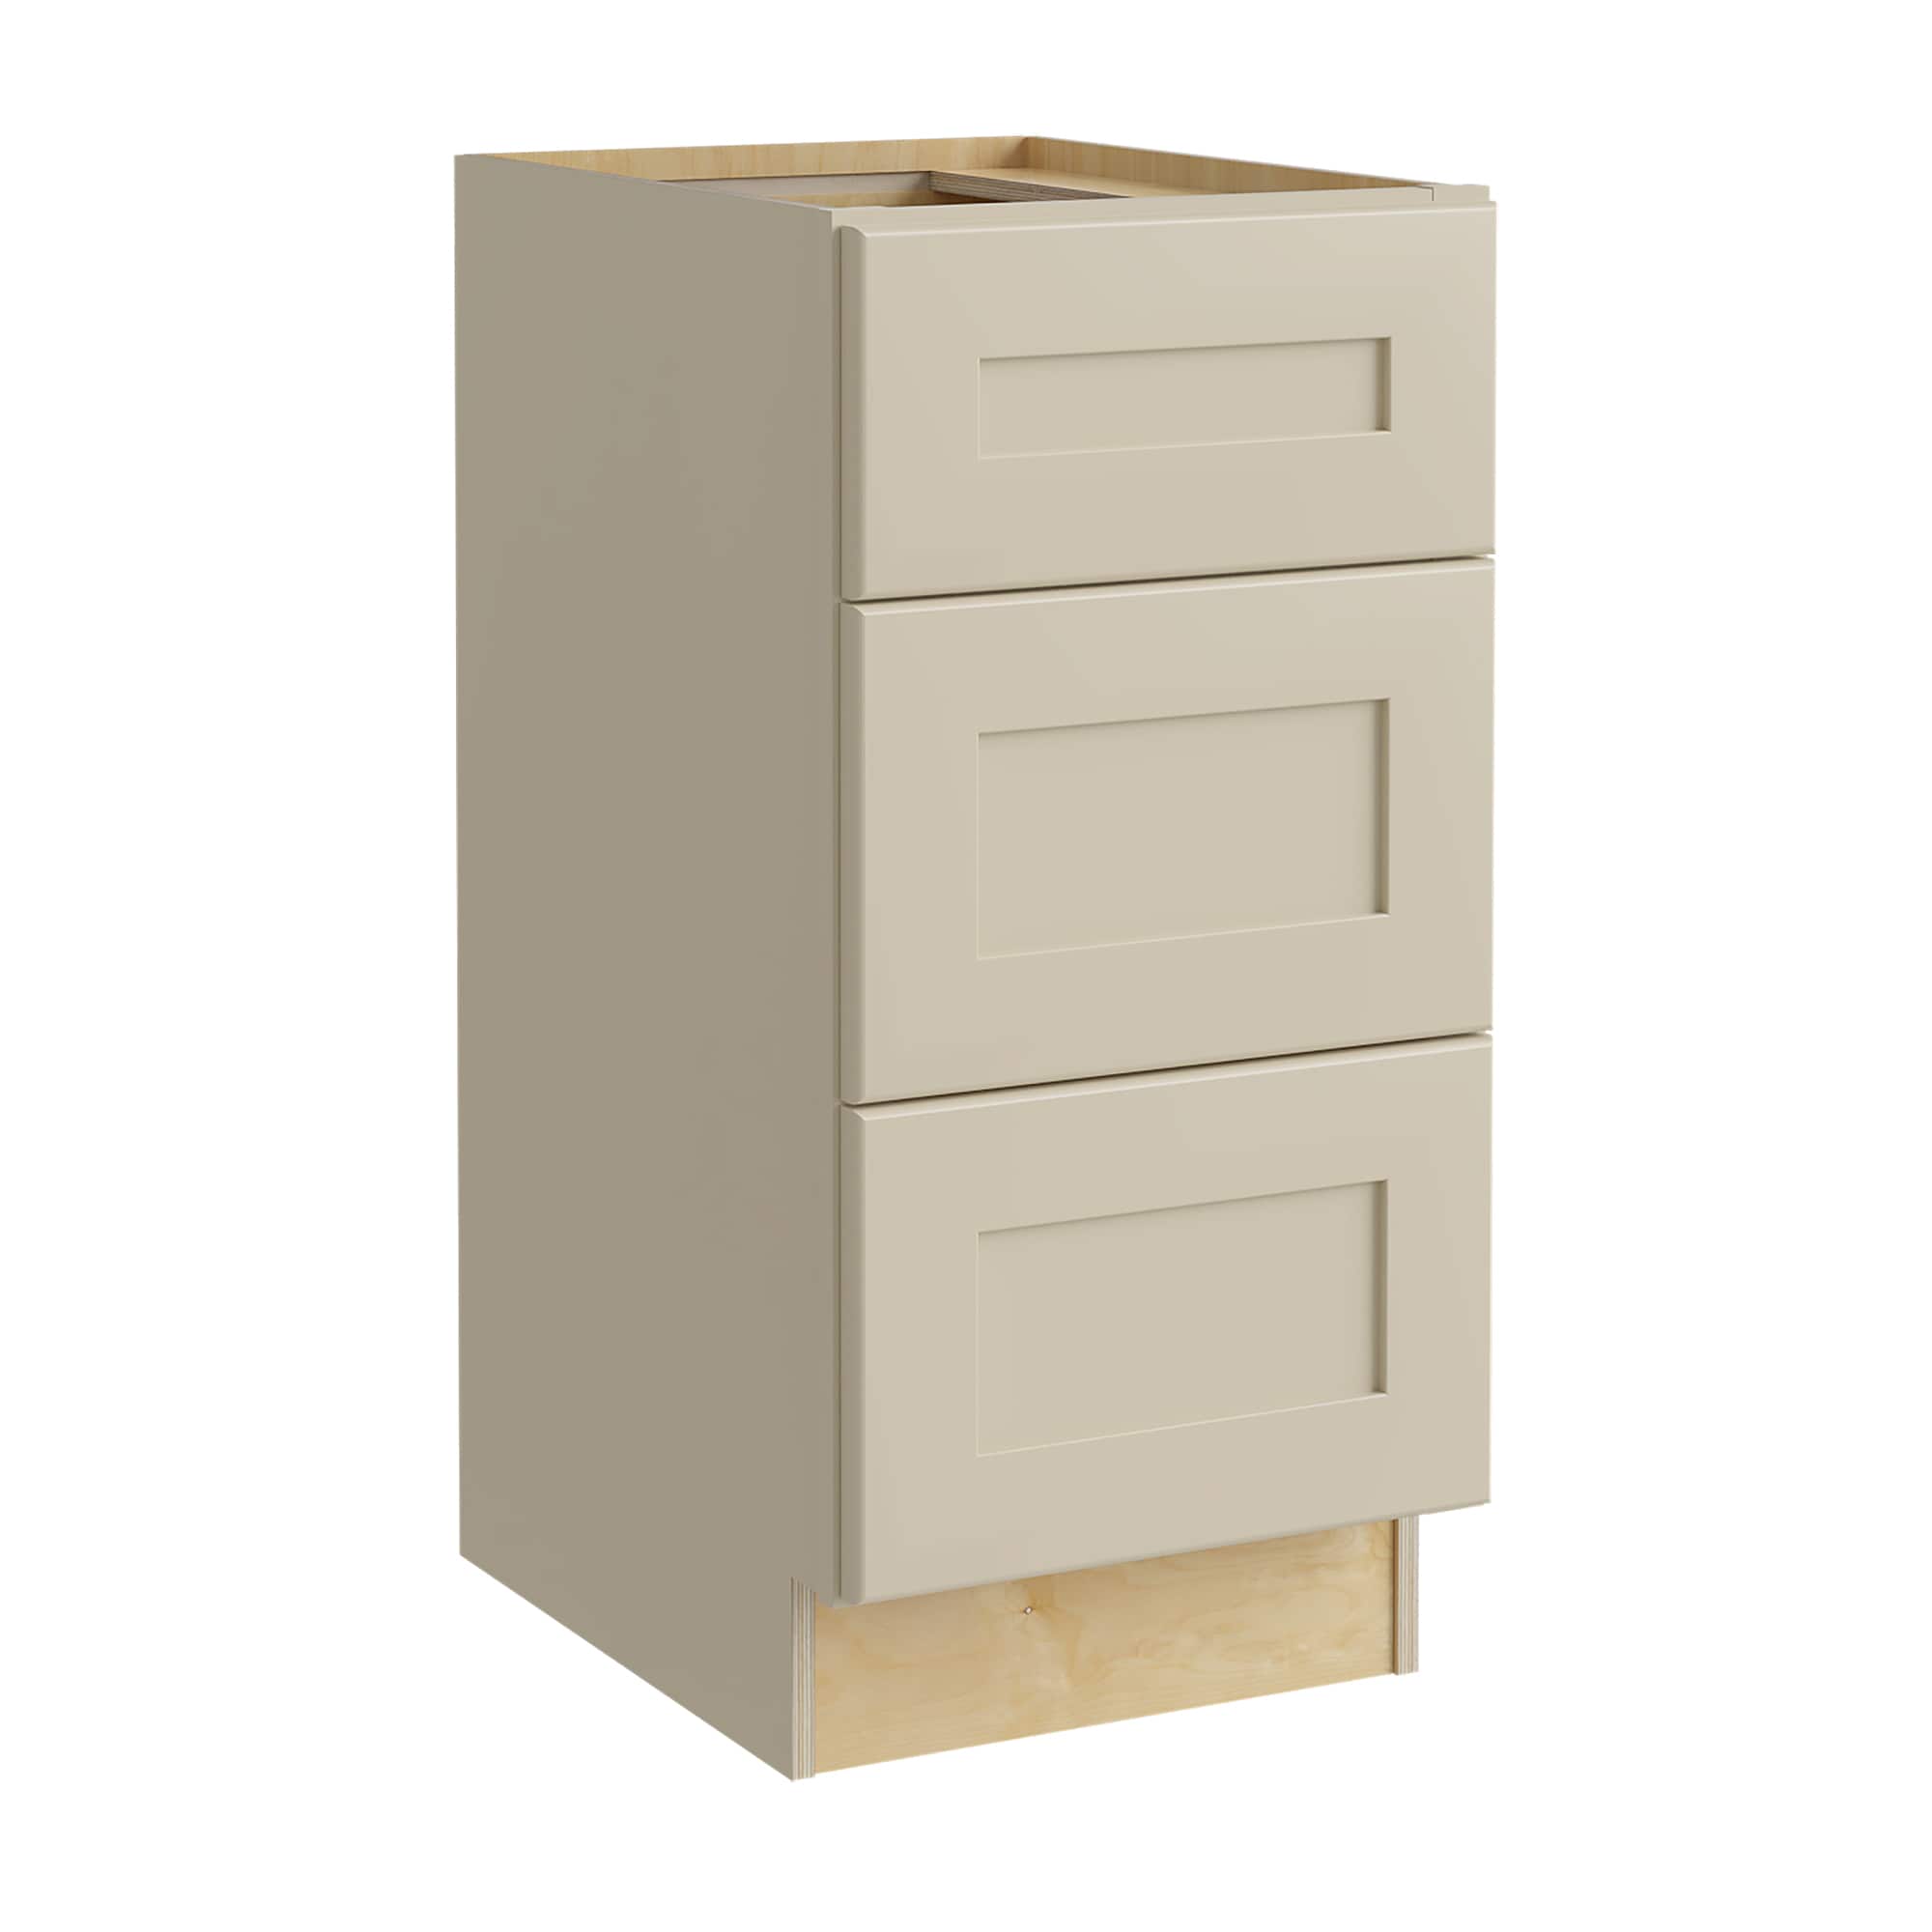 Luxxe Cabinetry 12-in W x 34.5-in H x 21-in D Norfolk Blended Cream Painted Drawer Base Fully Assembled Semi-custom Cabinet in Off-White | VBD1221-NBC